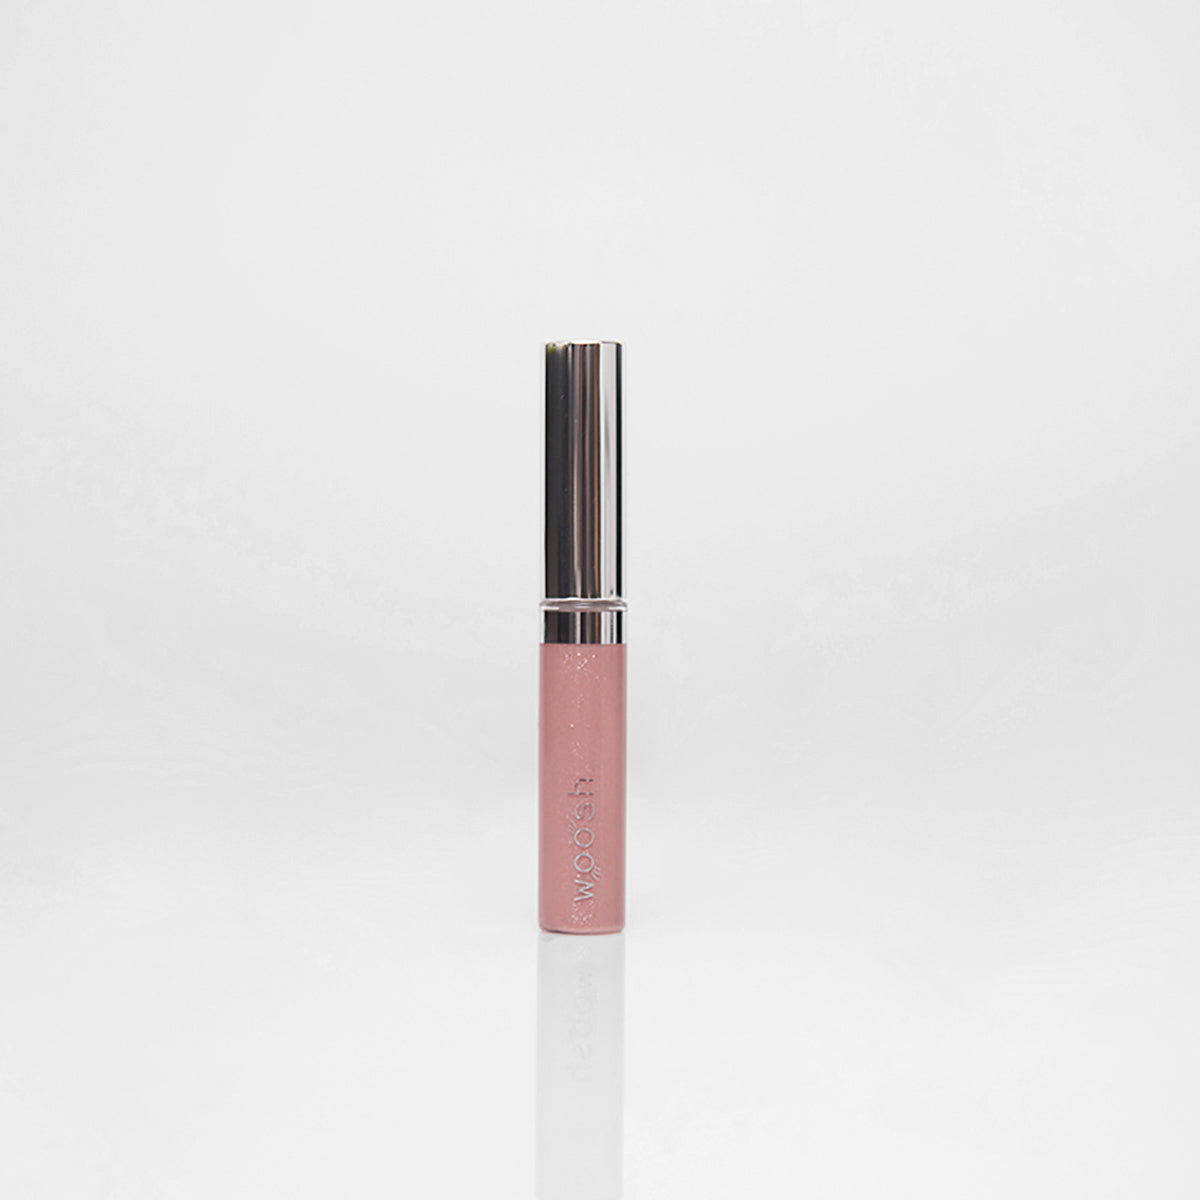 Moisturizing Woosh Beauty shea butter vegan mini lip gloss with shimmer in beige frosted shade